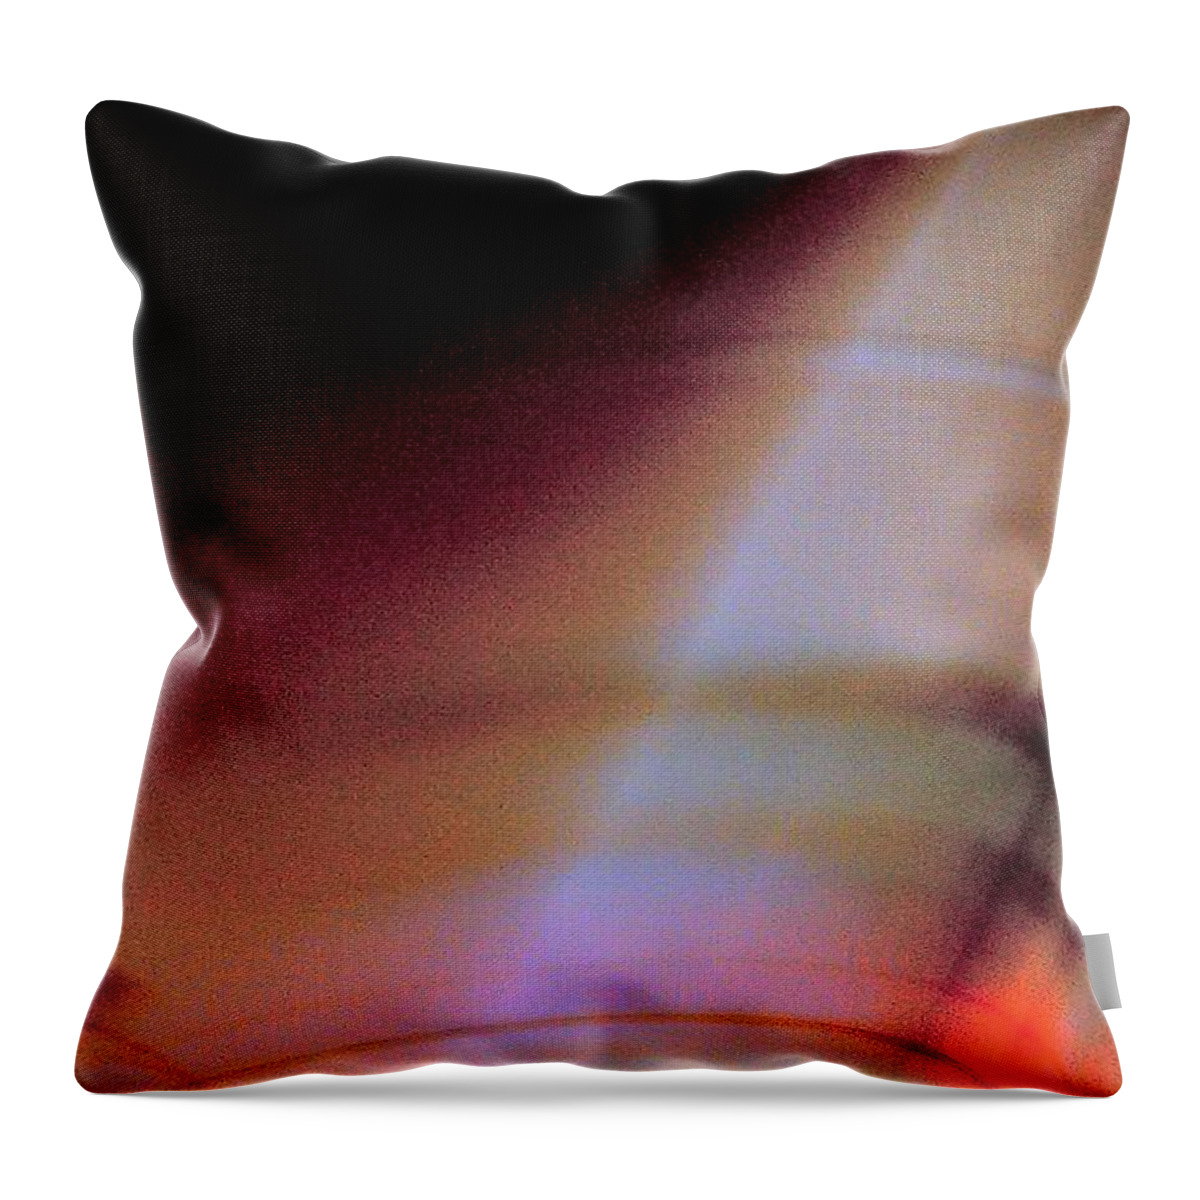 Afterglow Throw Pillow featuring the photograph Afterglow by Jacqueline McReynolds